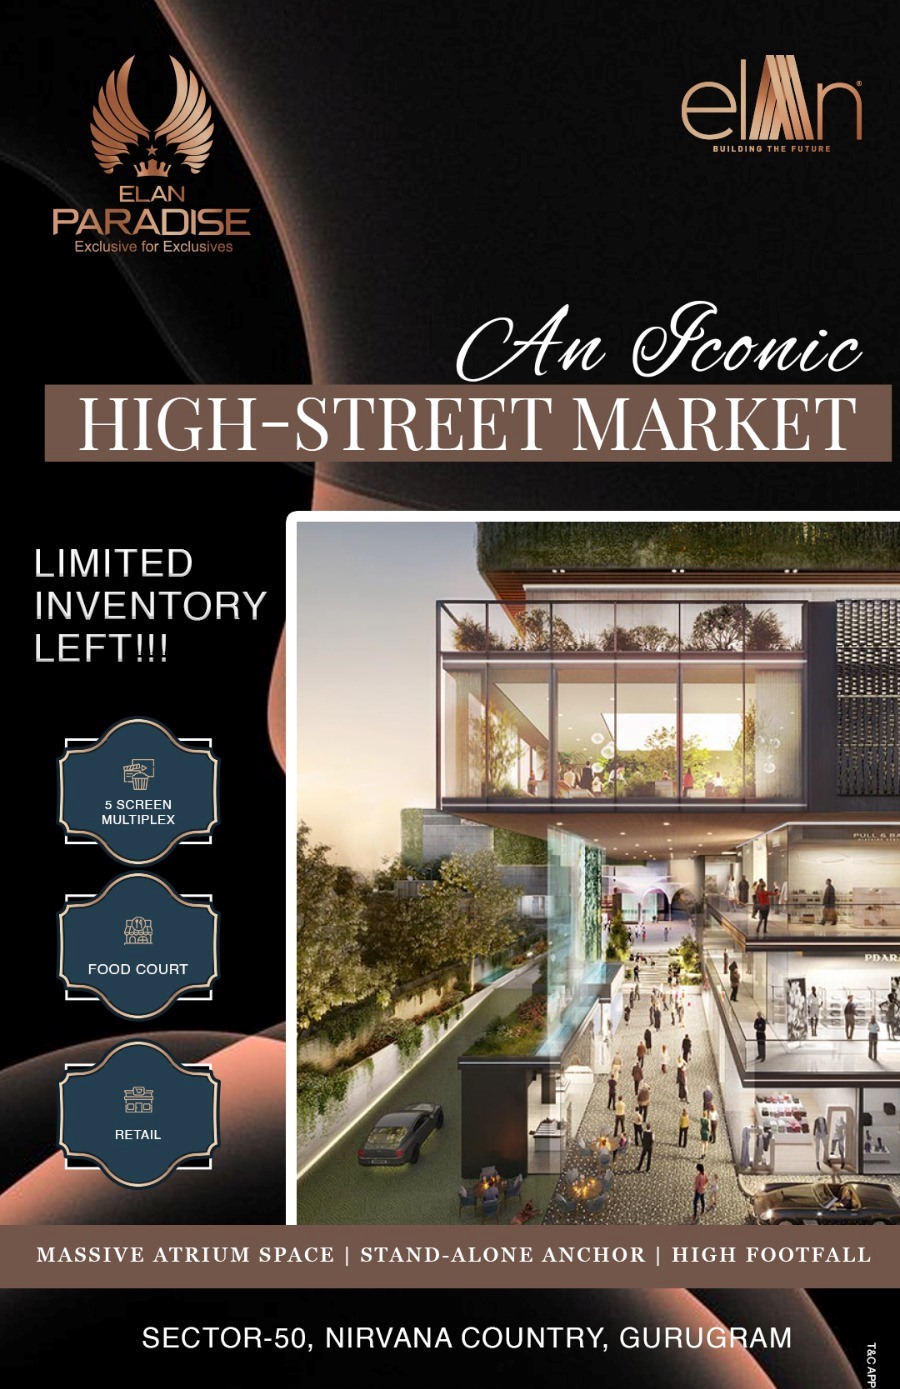 An Iconic high street market at Elan Paradise in Sector 50, Gurgaon Update